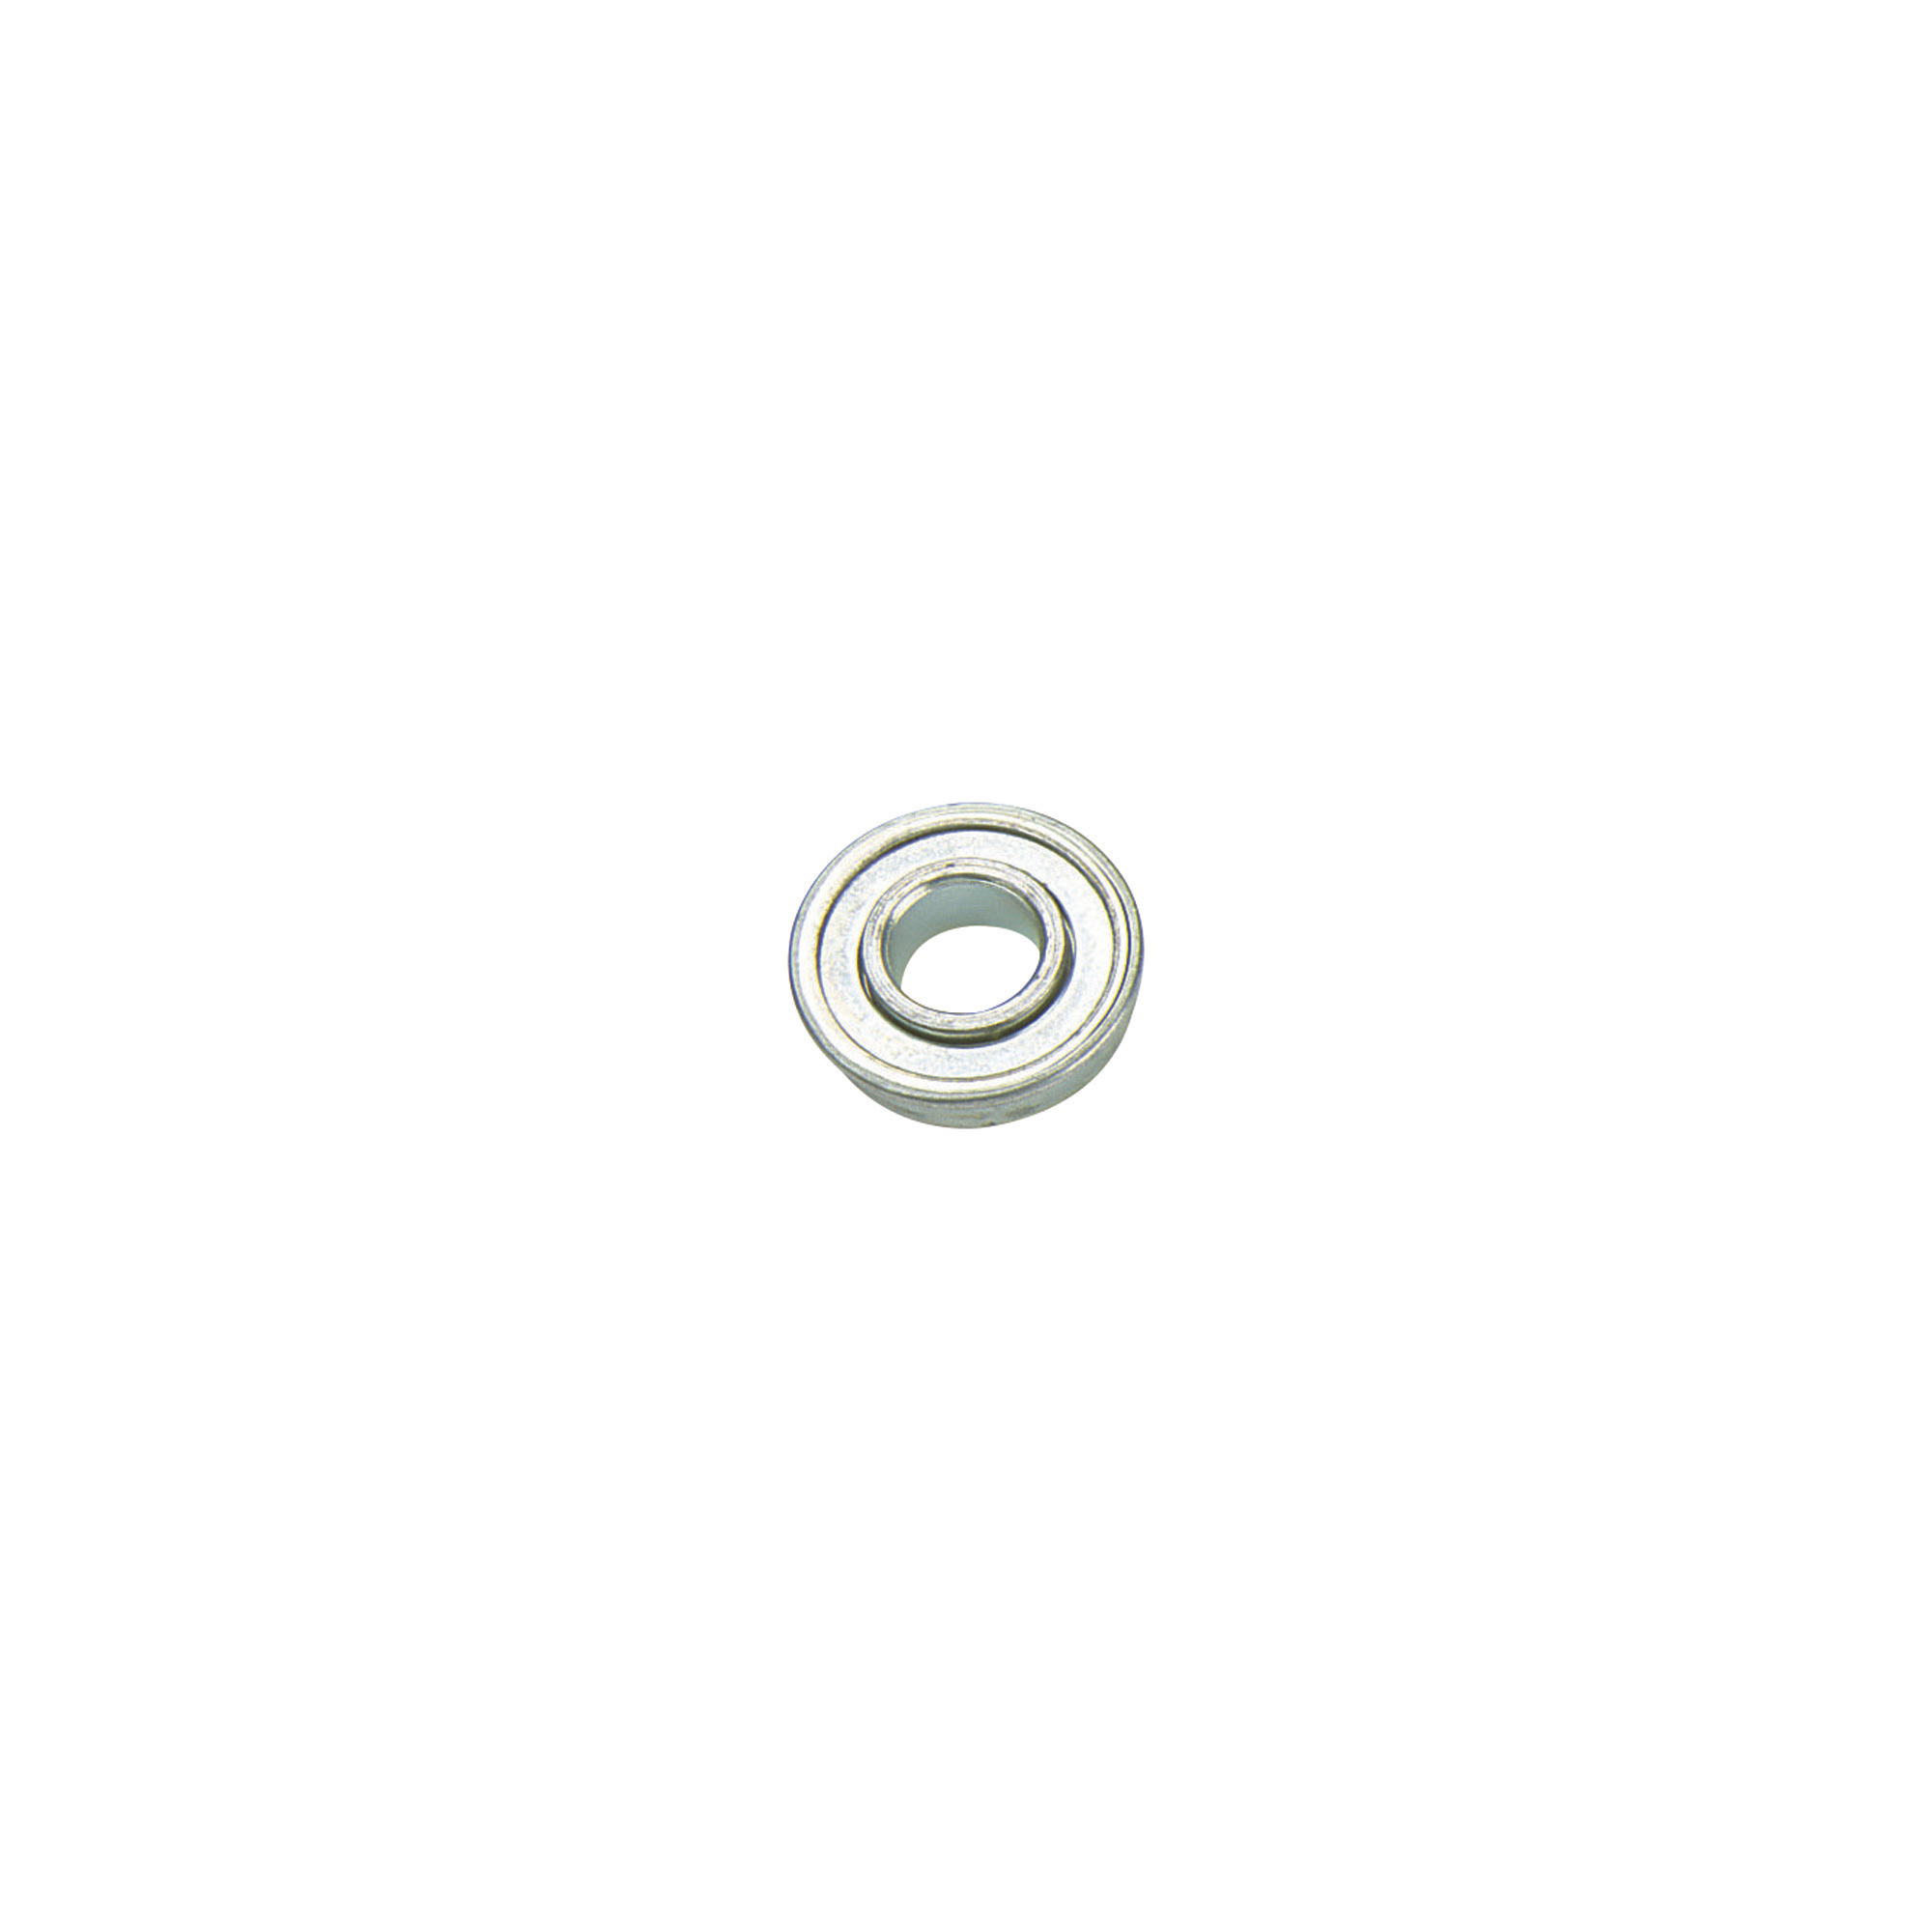  AOHRO Pack of 30 Spinner Blades with Ball Bearing